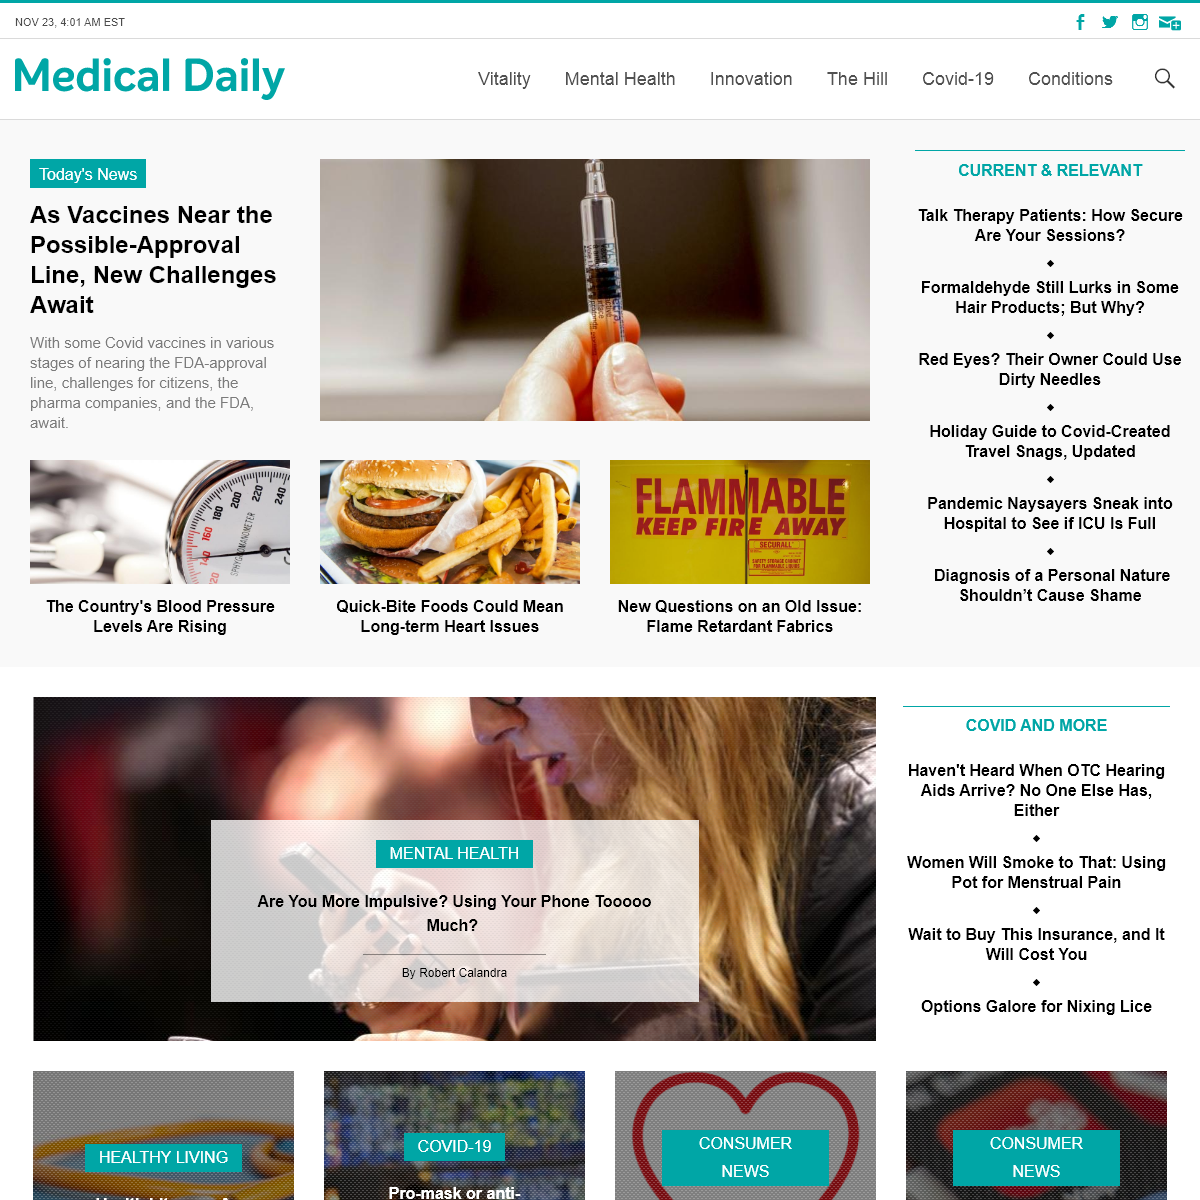 A complete backup of medicaldaily.com